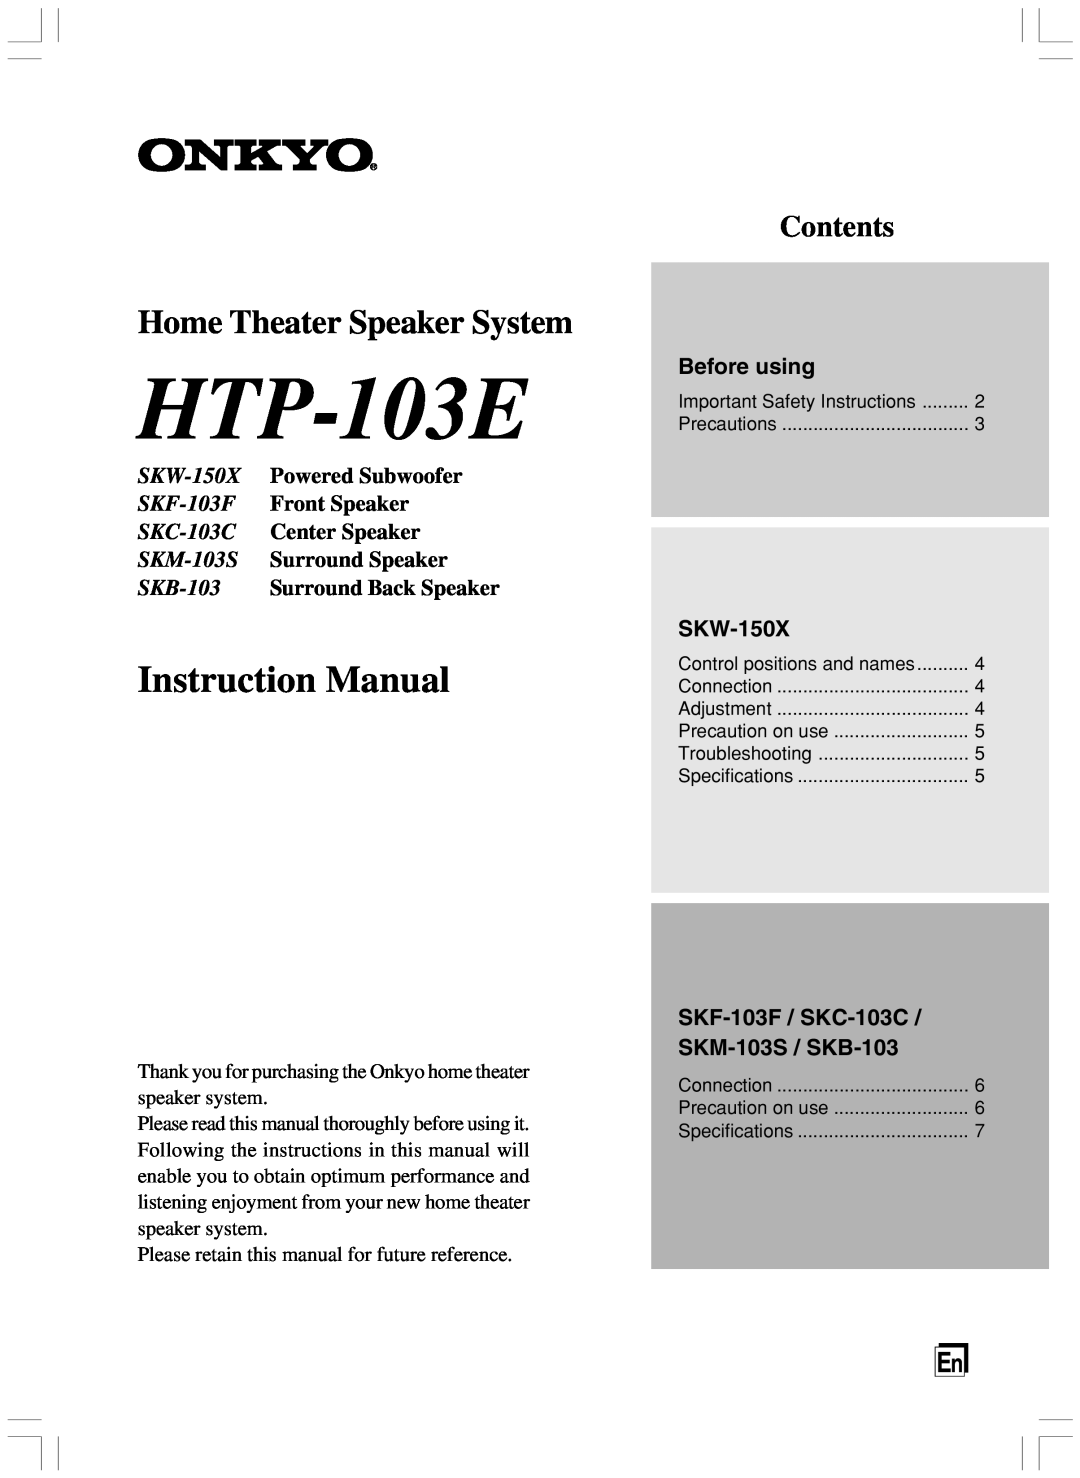 Onkyo HTP-103E instruction manual Before using, SKW-150X, SKF-103F / SKC-103C, SKM-103S / SKB-103, Contents 